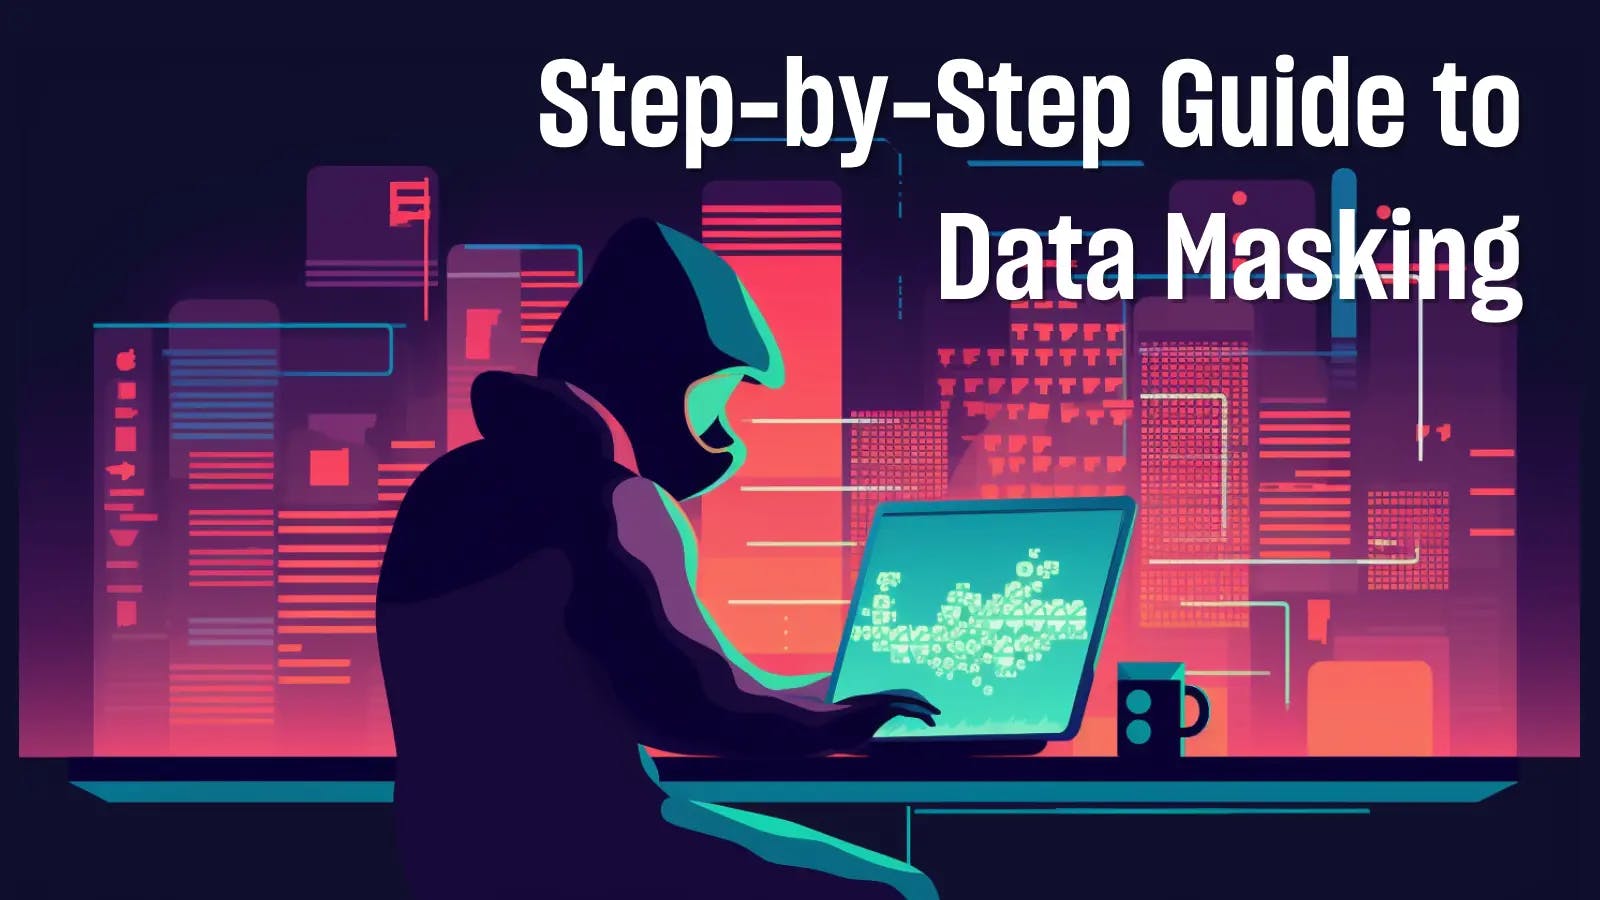 Step-by-Step Guide to Data Masking